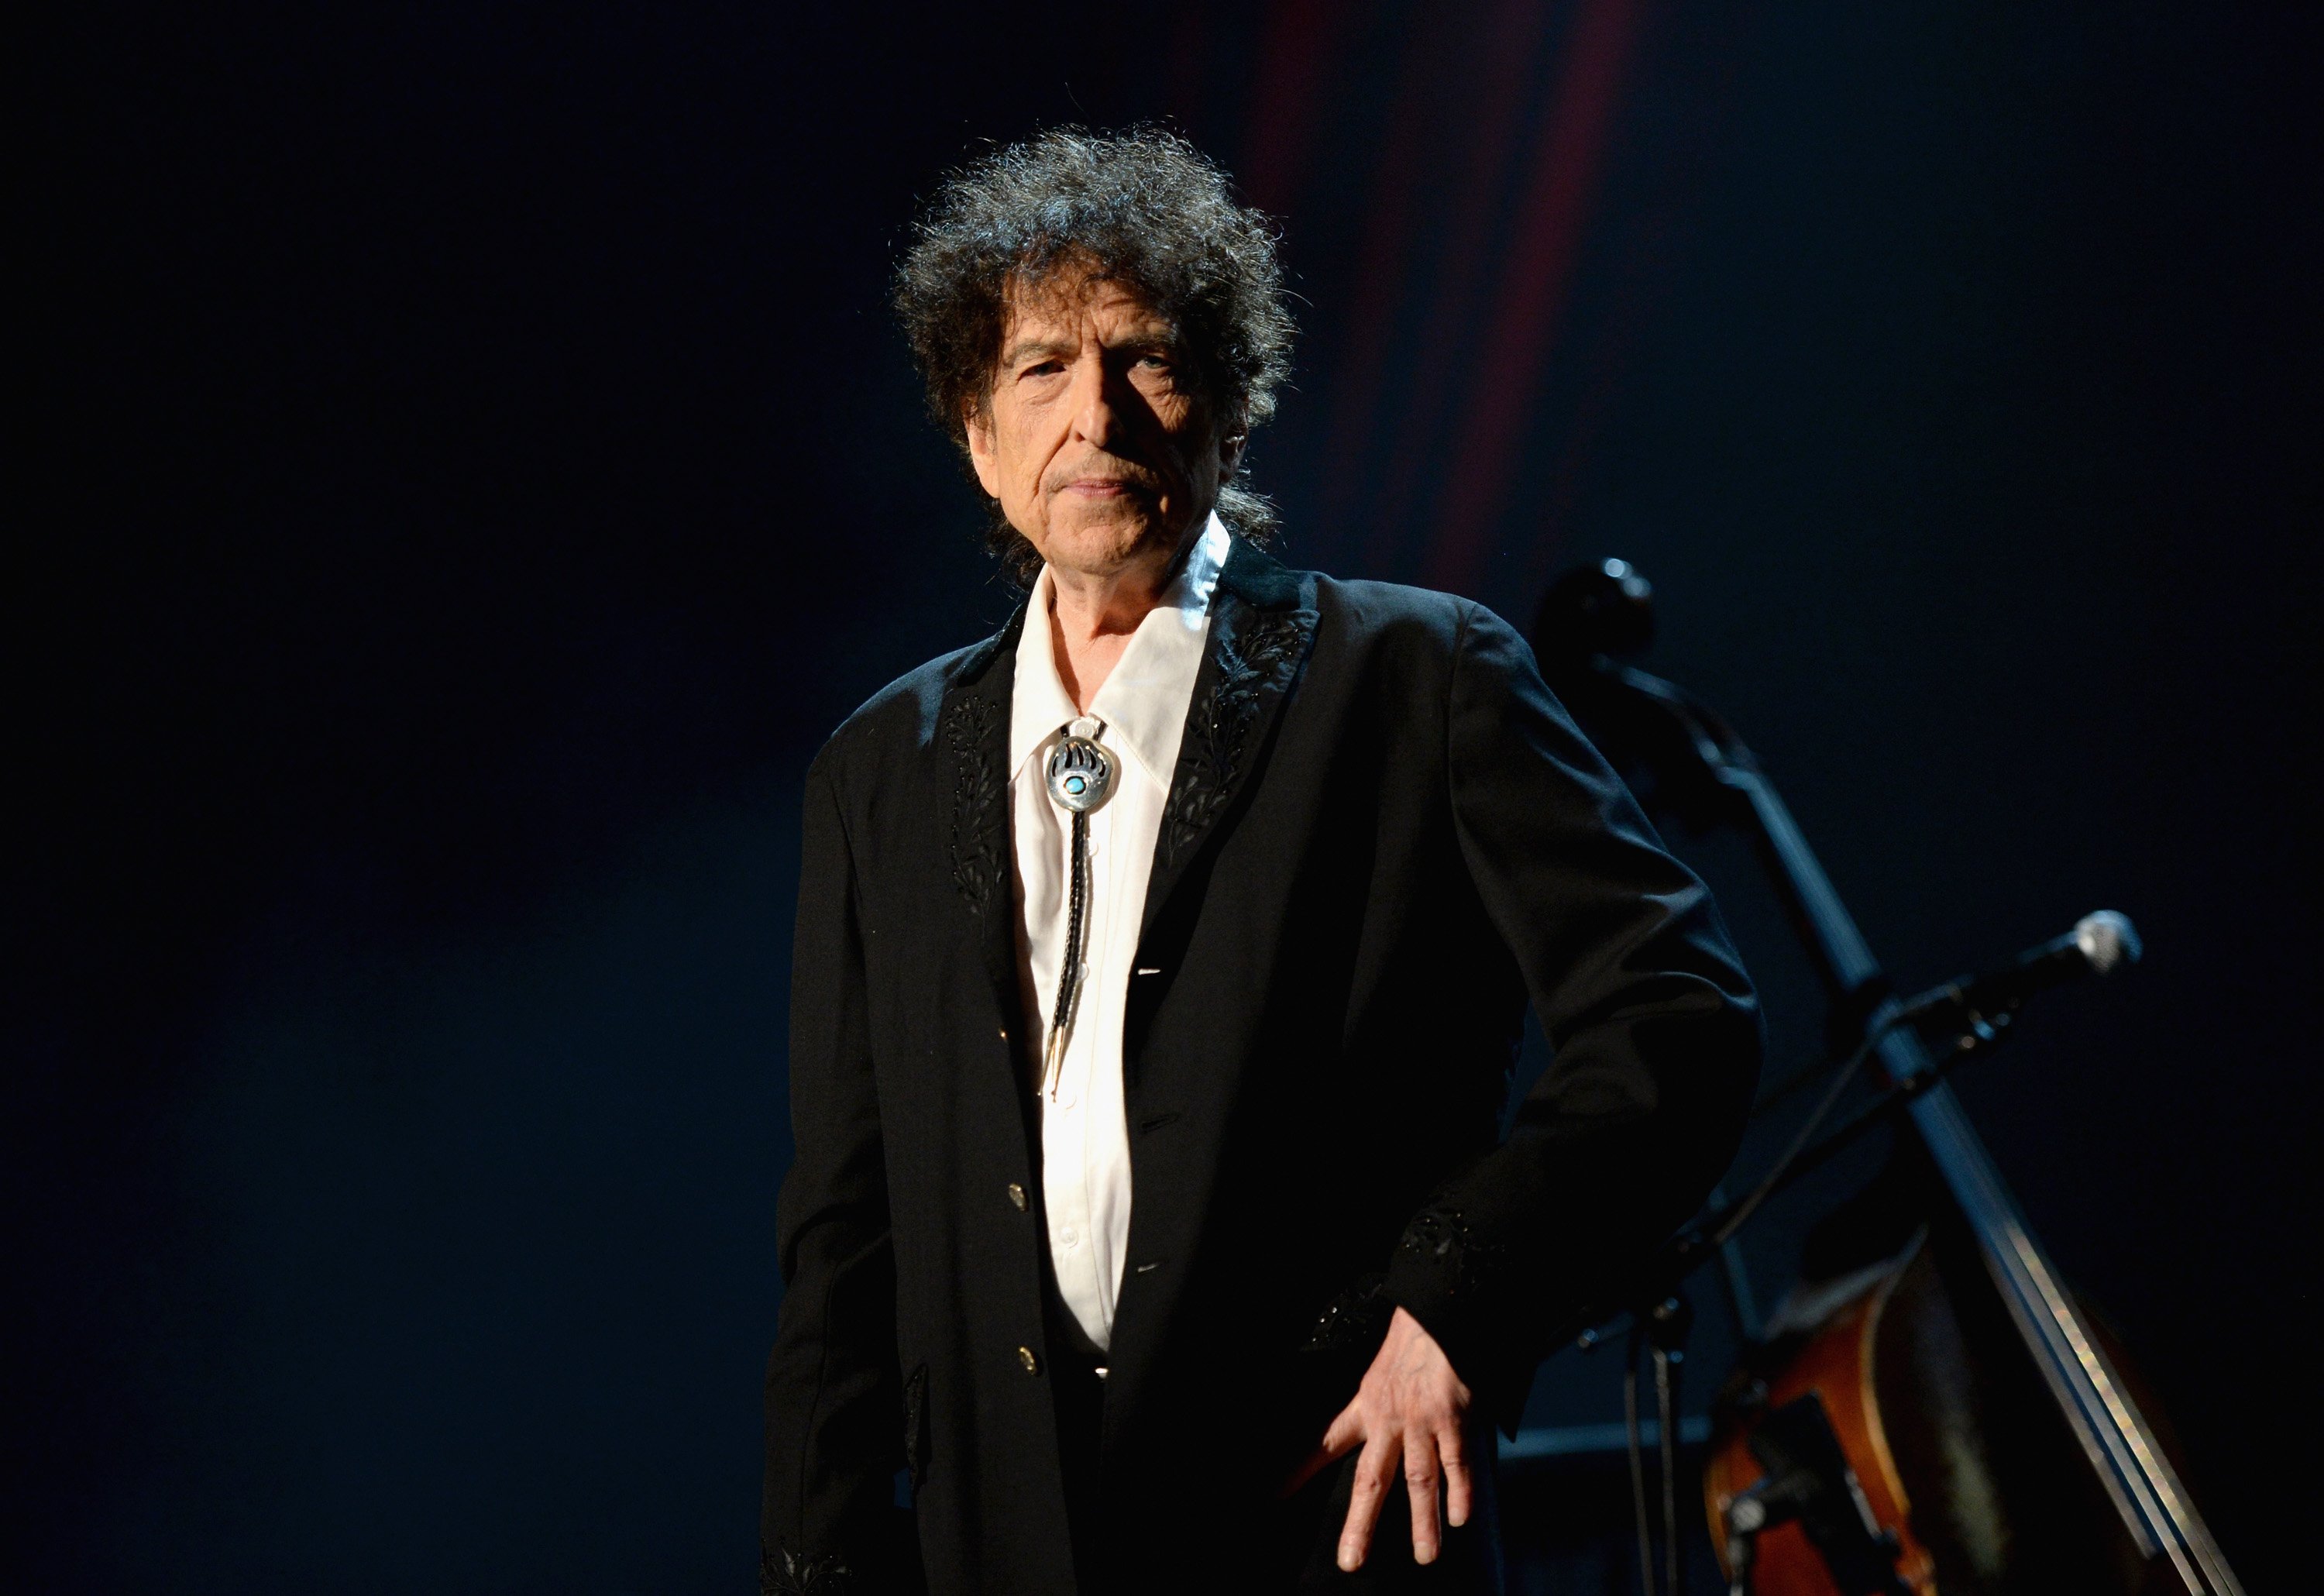 Bob Dylan wears a black jacket and a bolo tie and stands with his hand on his hip.